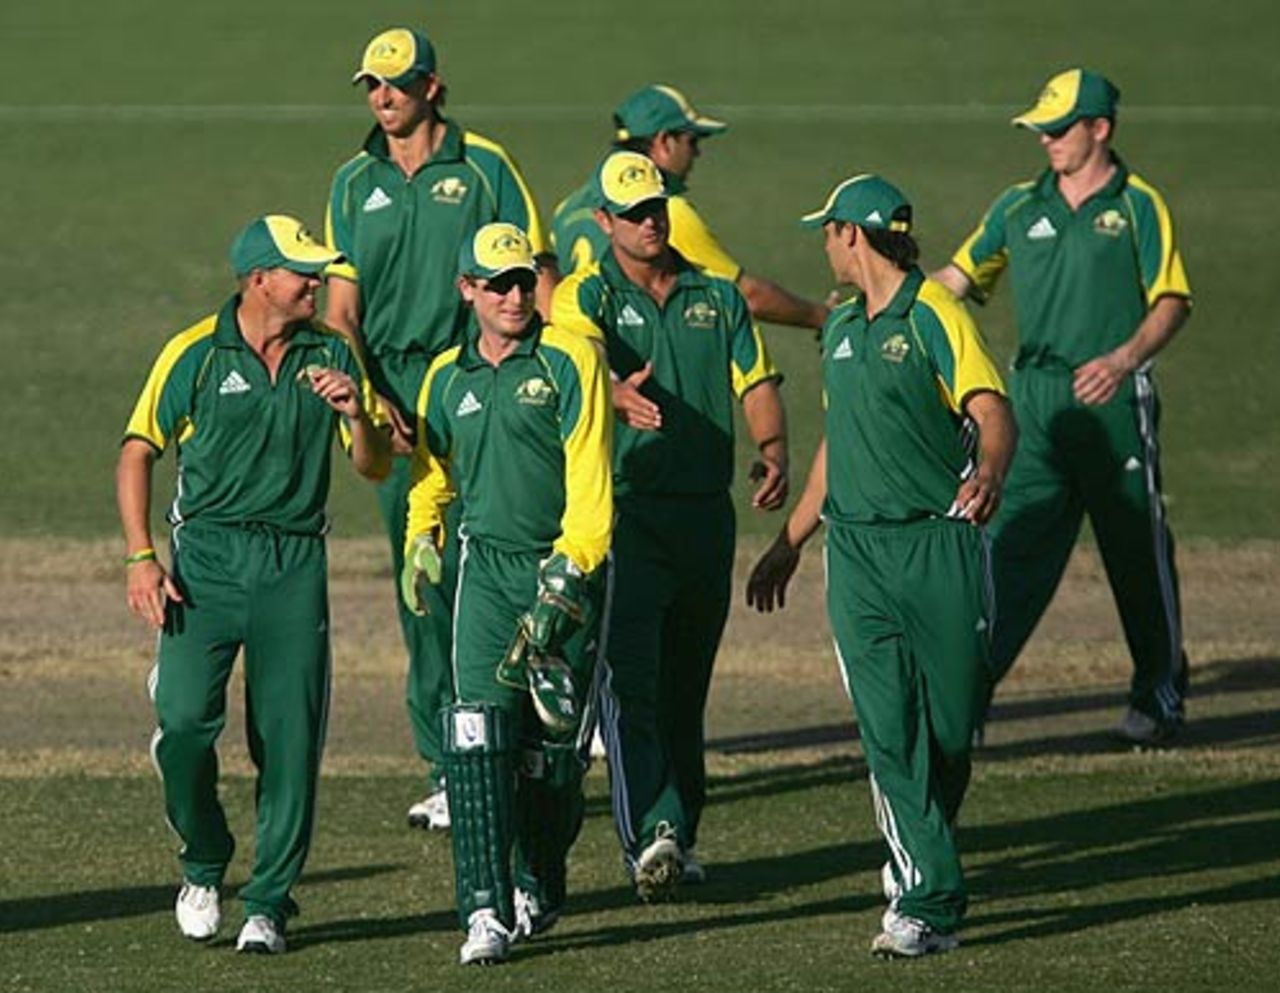 Australia A players celebrate their win over New Zealand A, Australia A v New Zealand A, Top End Series, Darwin, July 9, 2006